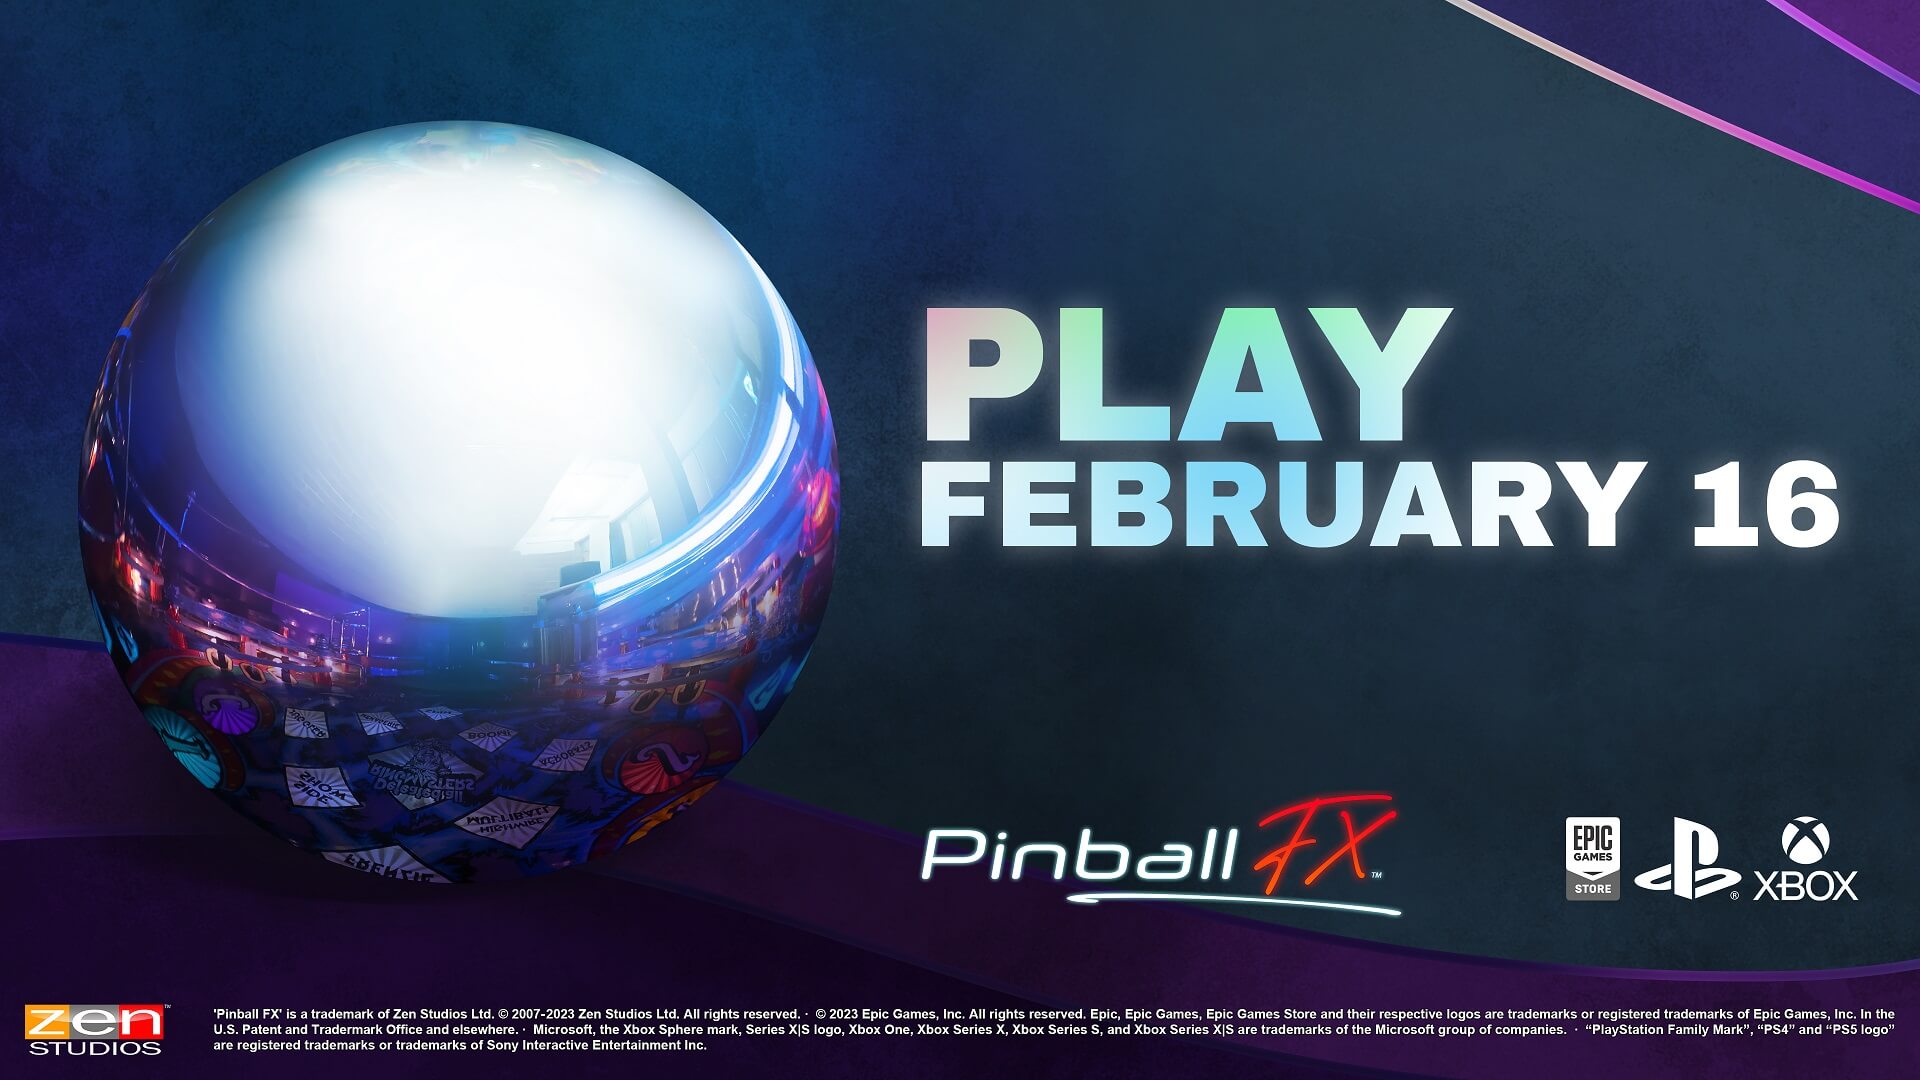 Pinball FX Arrives February 16 on PlayStation, Xbox and leaves Early Access  on Epic Games Store